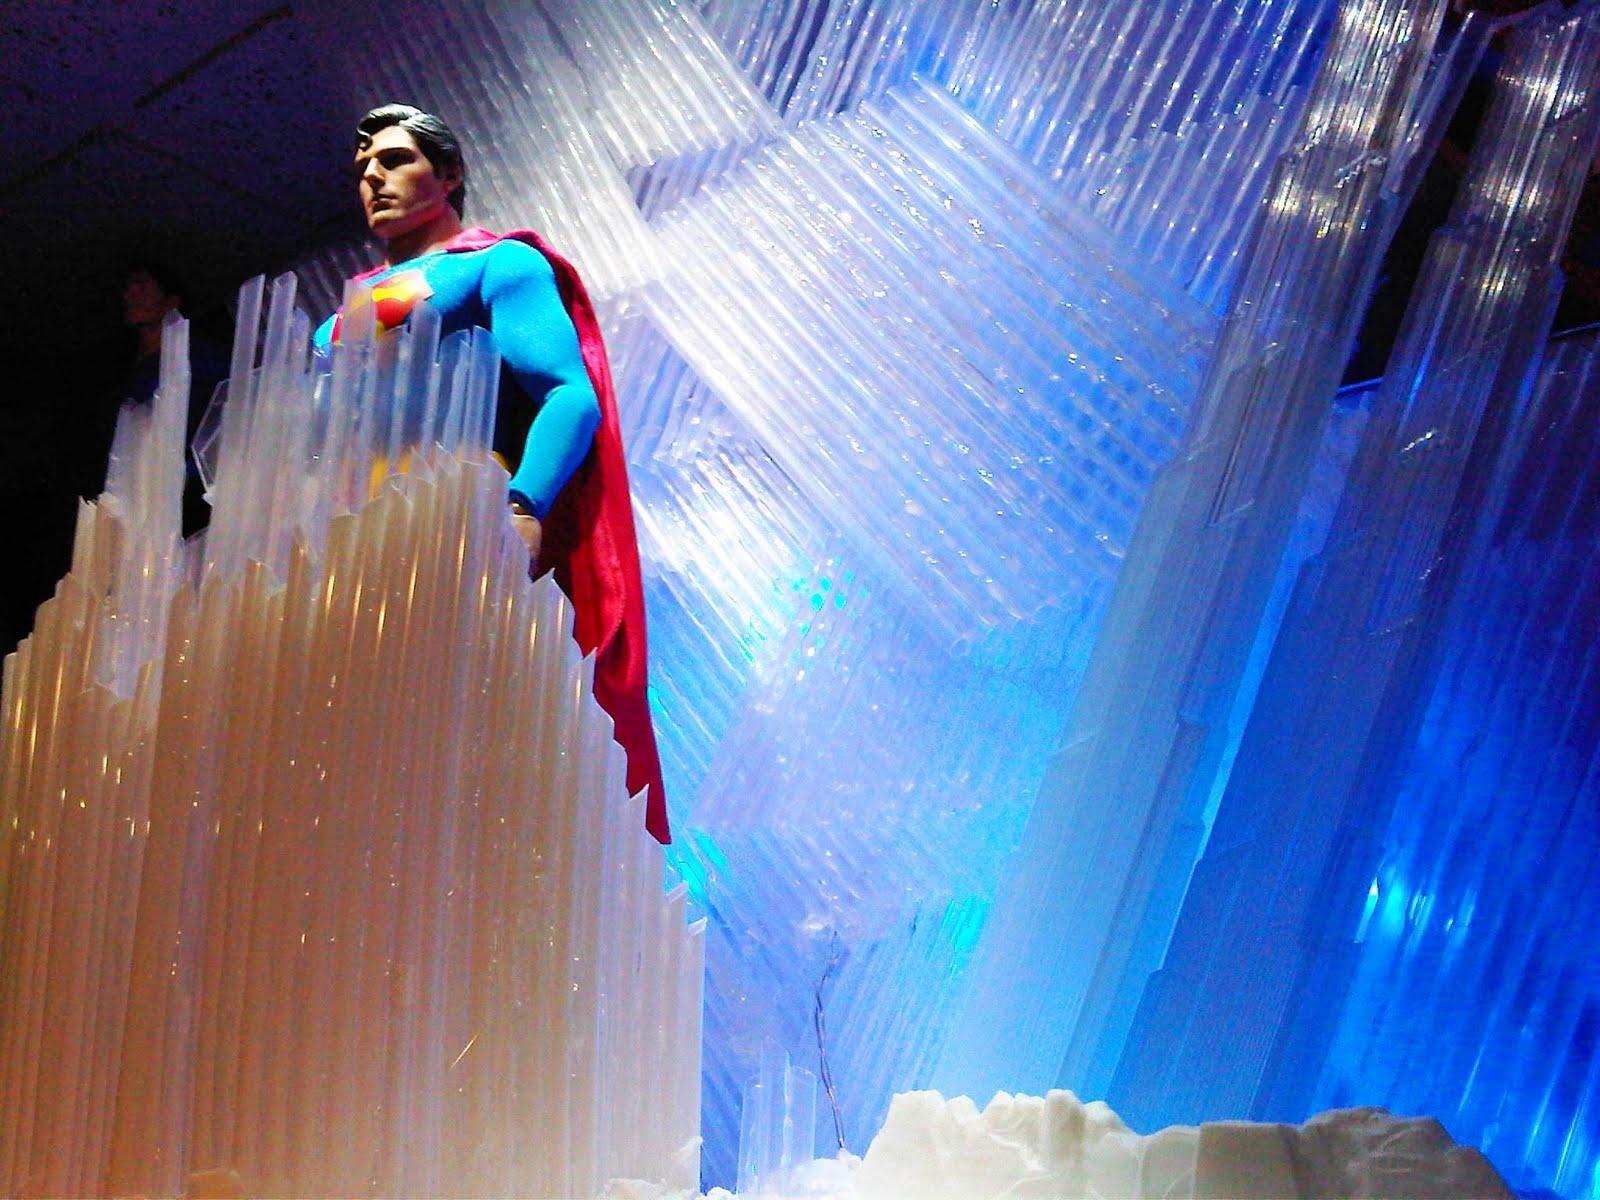 The Final Frontier of Collecting: Christopher Reeves "Superman"